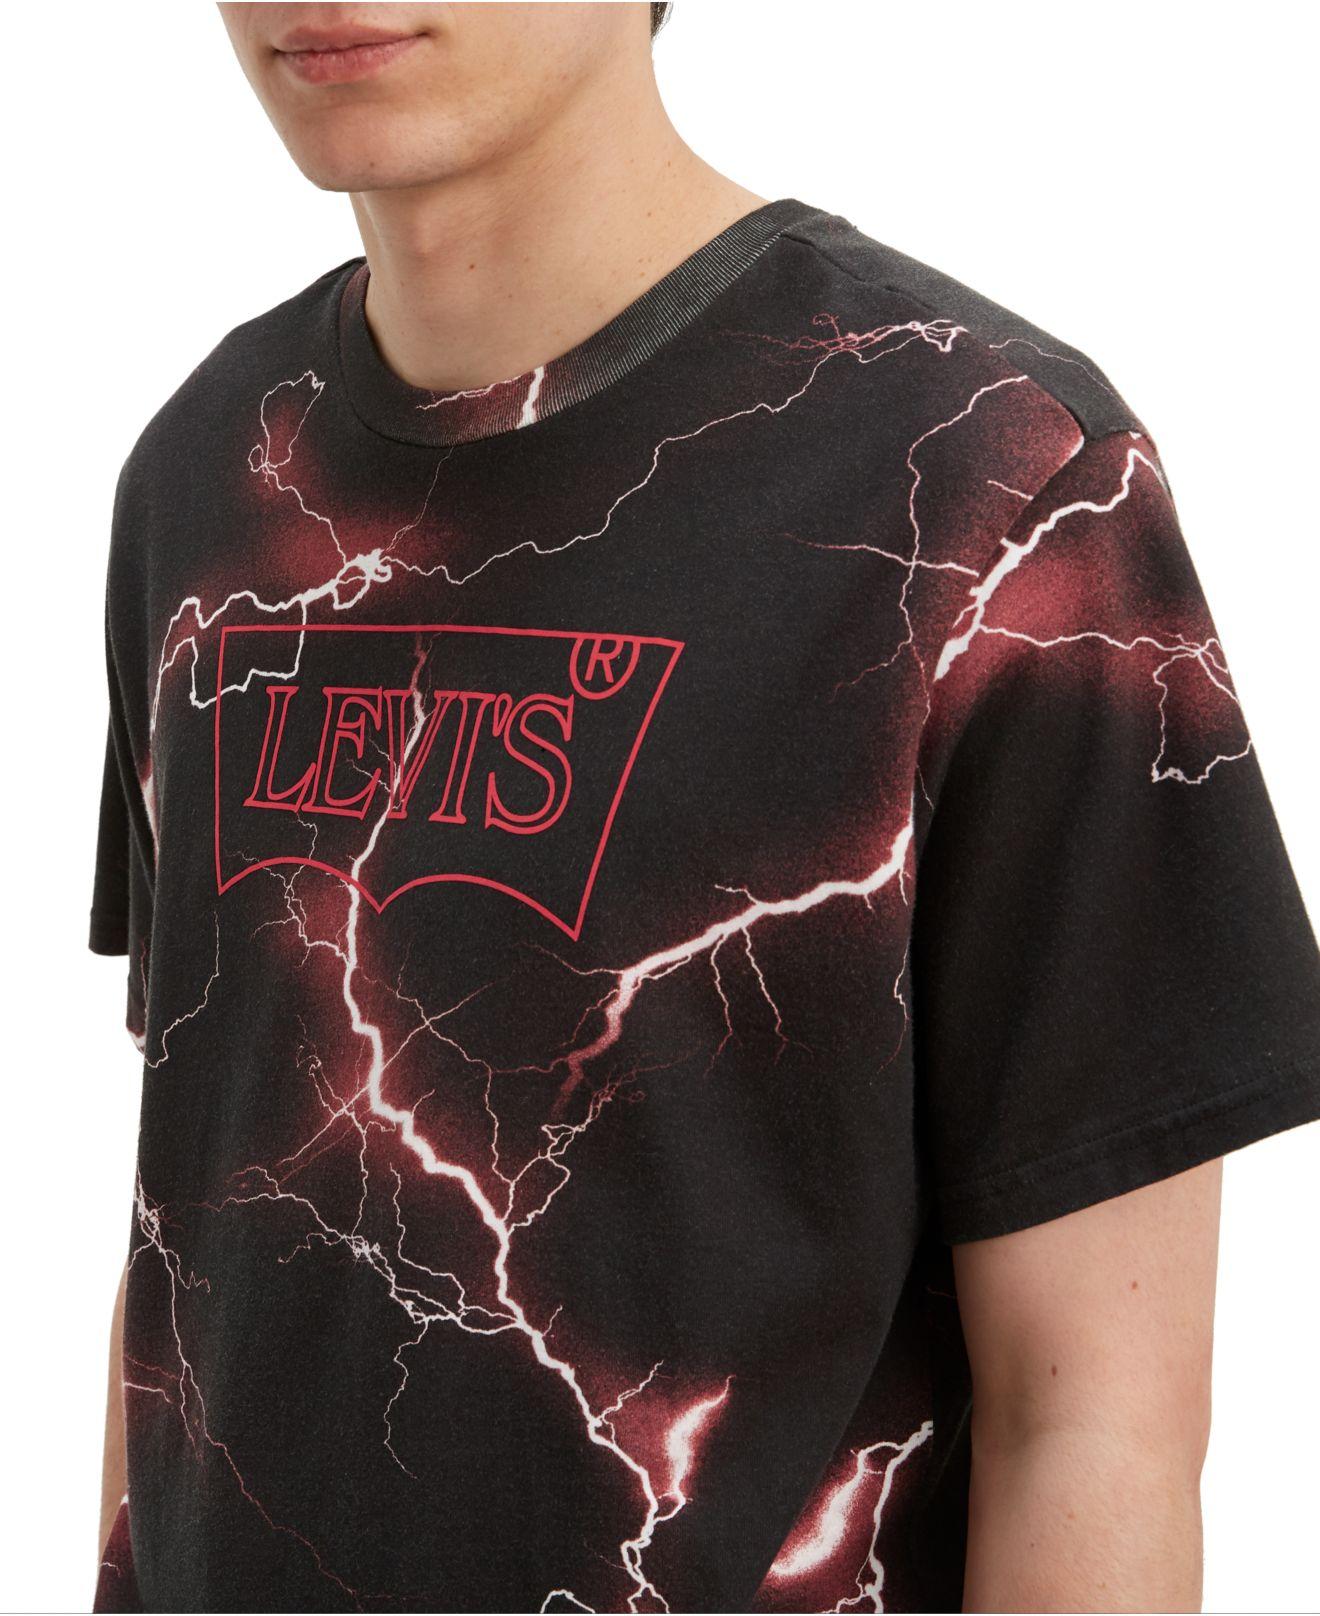 levis shirt stranger things Cheaper Than Retail Price> Buy Clothing,  Accessories and lifestyle products for women & men -